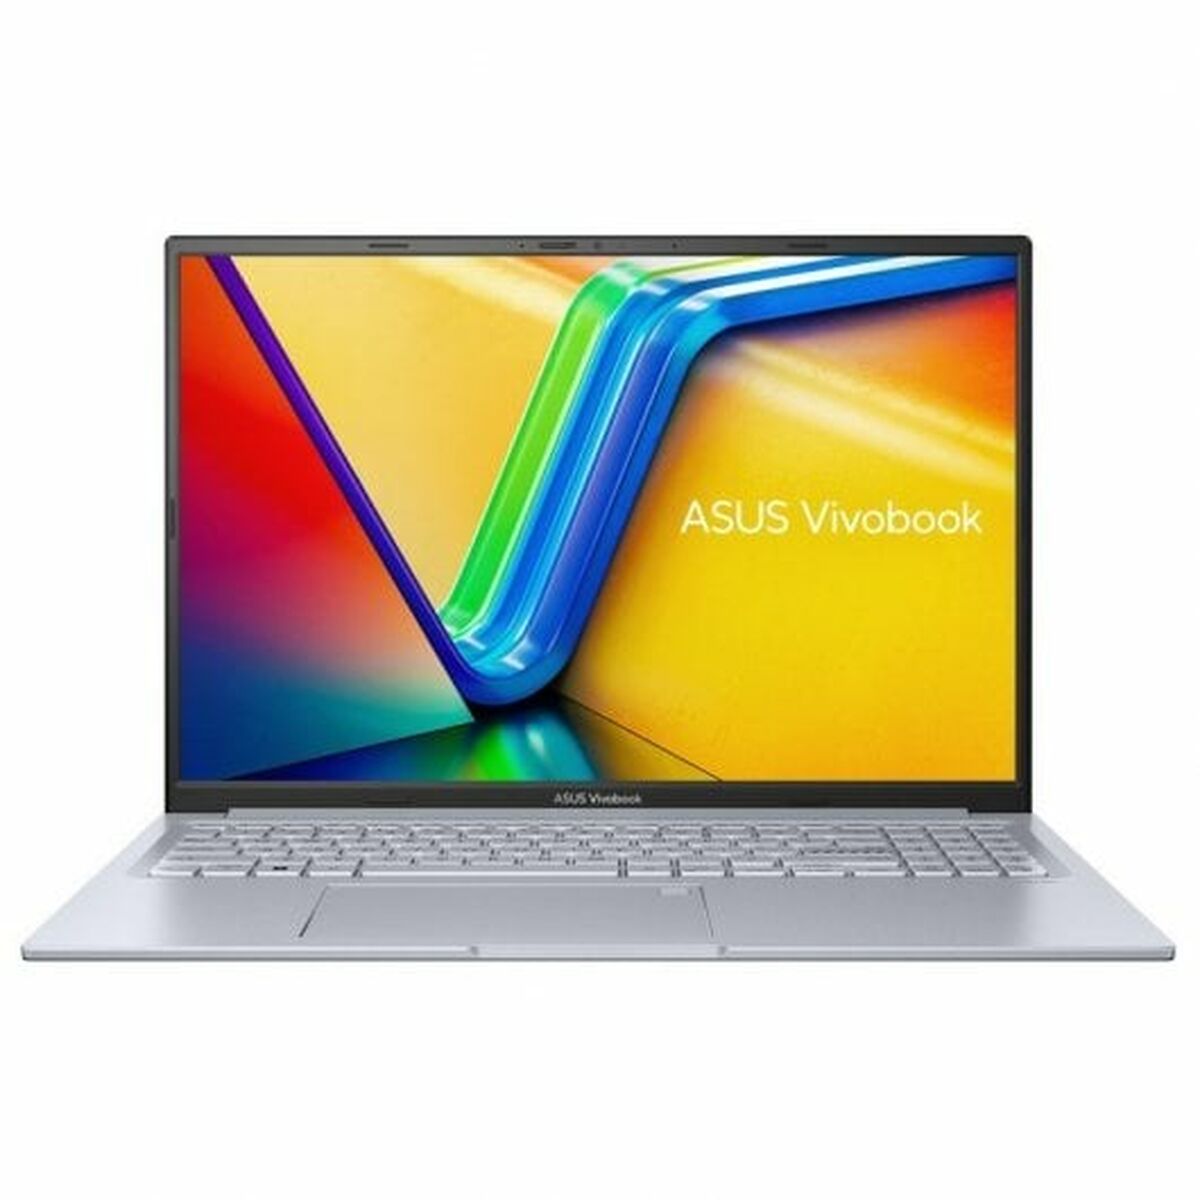 Laptop Asus VivoBook 16X K3605ZU-N1113 16" i7-12650H 16 GB RAM 512 GB SSD Nvidia Geforce RTX 4050, Asus, Computing, notebook-asus-vivobook-16x-k3605zu-n1113-512-gb-ssd-16-gb-ram-16-i7-12650h, :2-in-1, :512 GB, :Intel-i7, :RAM 16 GB, :Touchscreen, Brand_Asus, category-reference-2609, category-reference-2791, category-reference-2797, category-reference-t-19685, Condition_NEW, office, Price_+ 1000, Teleworking, RiotNook